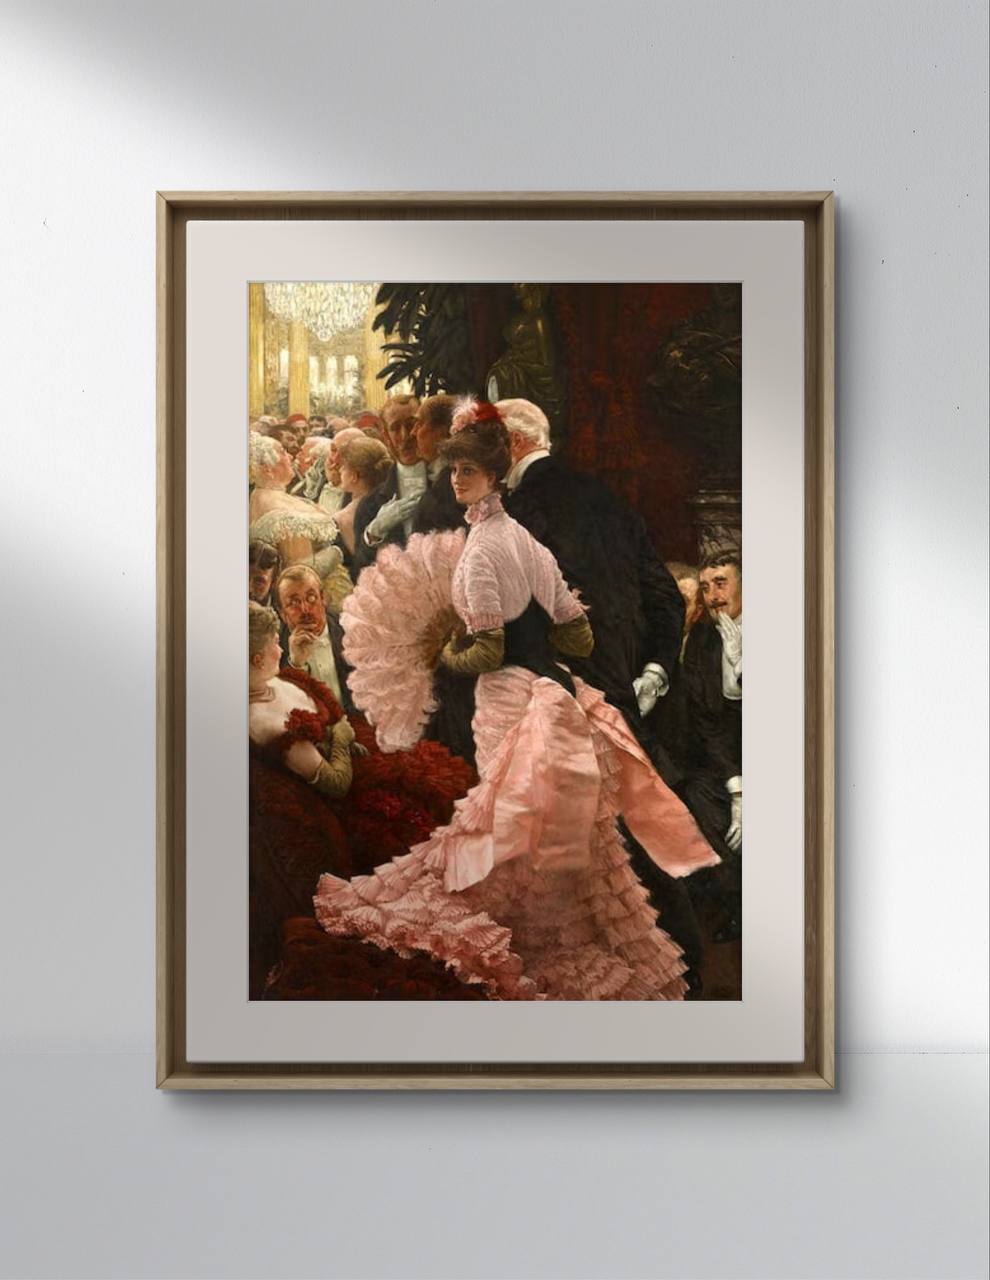 A poster of "A Political Woman" by James Tissot displayed on a minimalist white wall. The artwork features a woman in a pink dress with a fan, surrounded by a lively crowd at a sophisticated event.   This art reproduction brings a classic and elegant touch to your home decor. Keywords: Wall Art, home decor, painting, art reproduction, famous artist, Poster, print, James Tissot, A Political Woman.